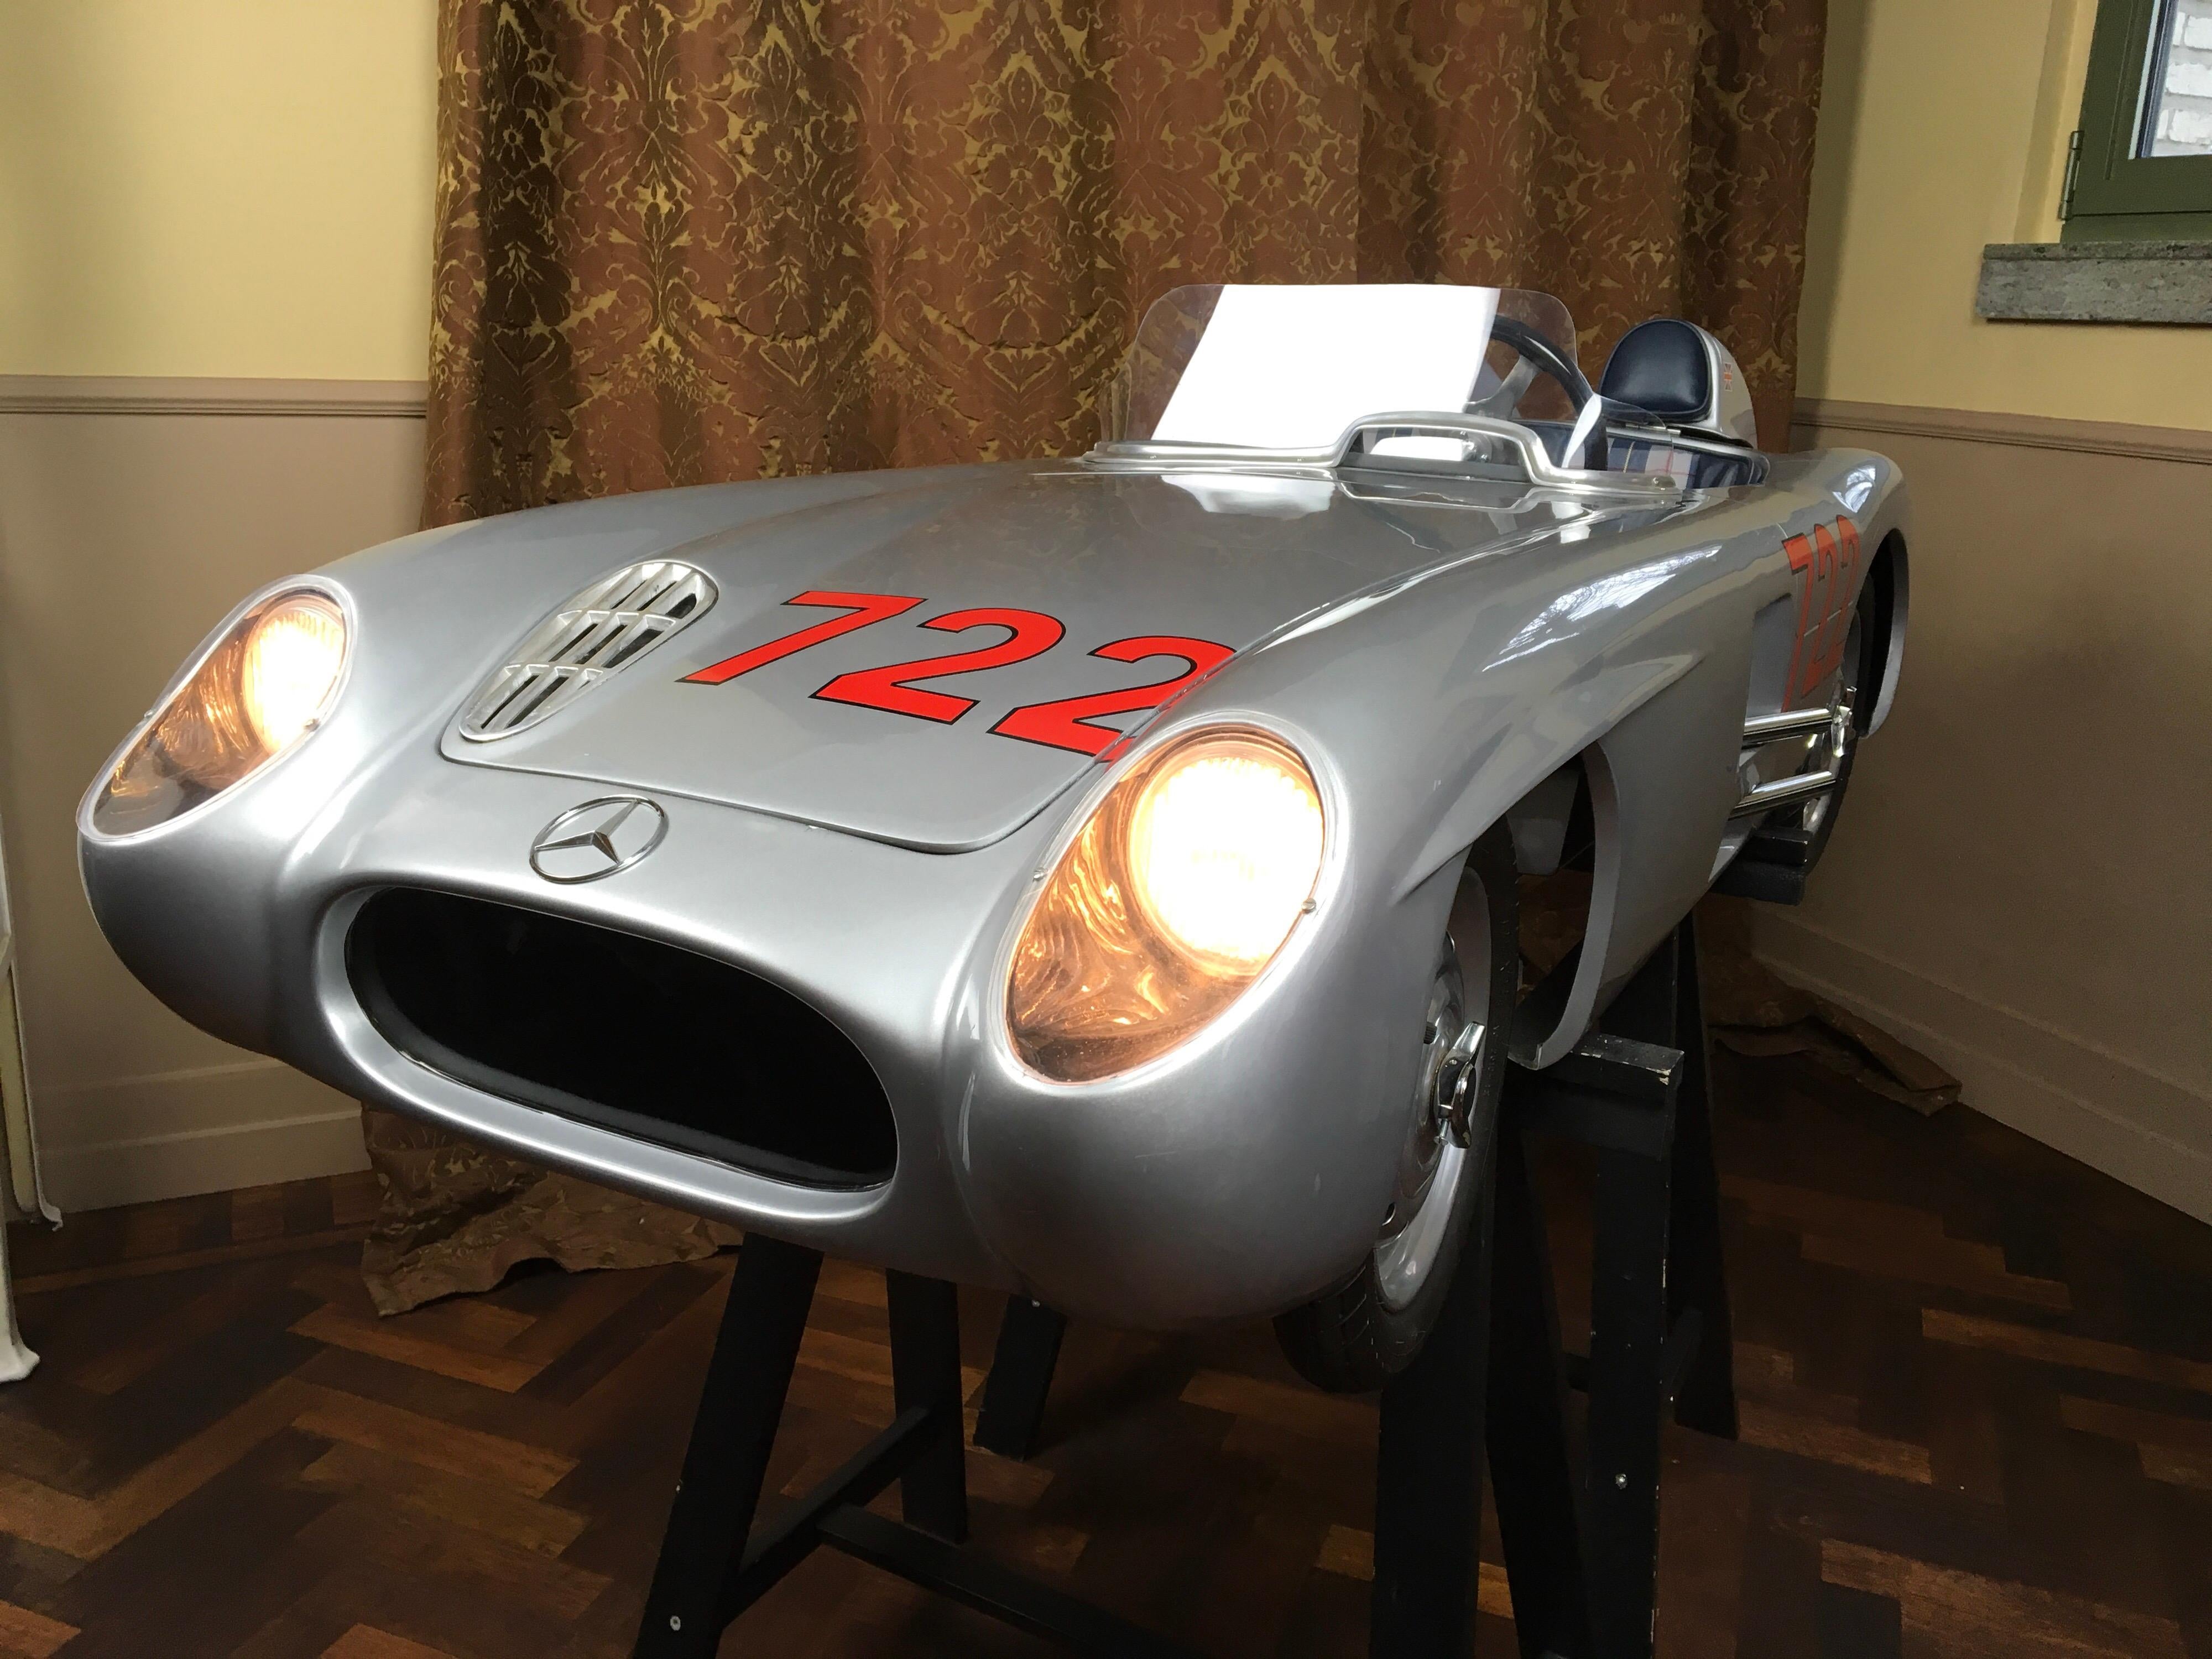 Exceptional 1/2 Scale handmade Electric Mercedes-Benz 300 SLR Junior Car. 
This 722 Racer Half Scale Kids Car has number 004 / 005 and is signed by Sir Stirling Moss , the legendary Race Pilote that drove Victory in the 1955 Mille Miglia with this